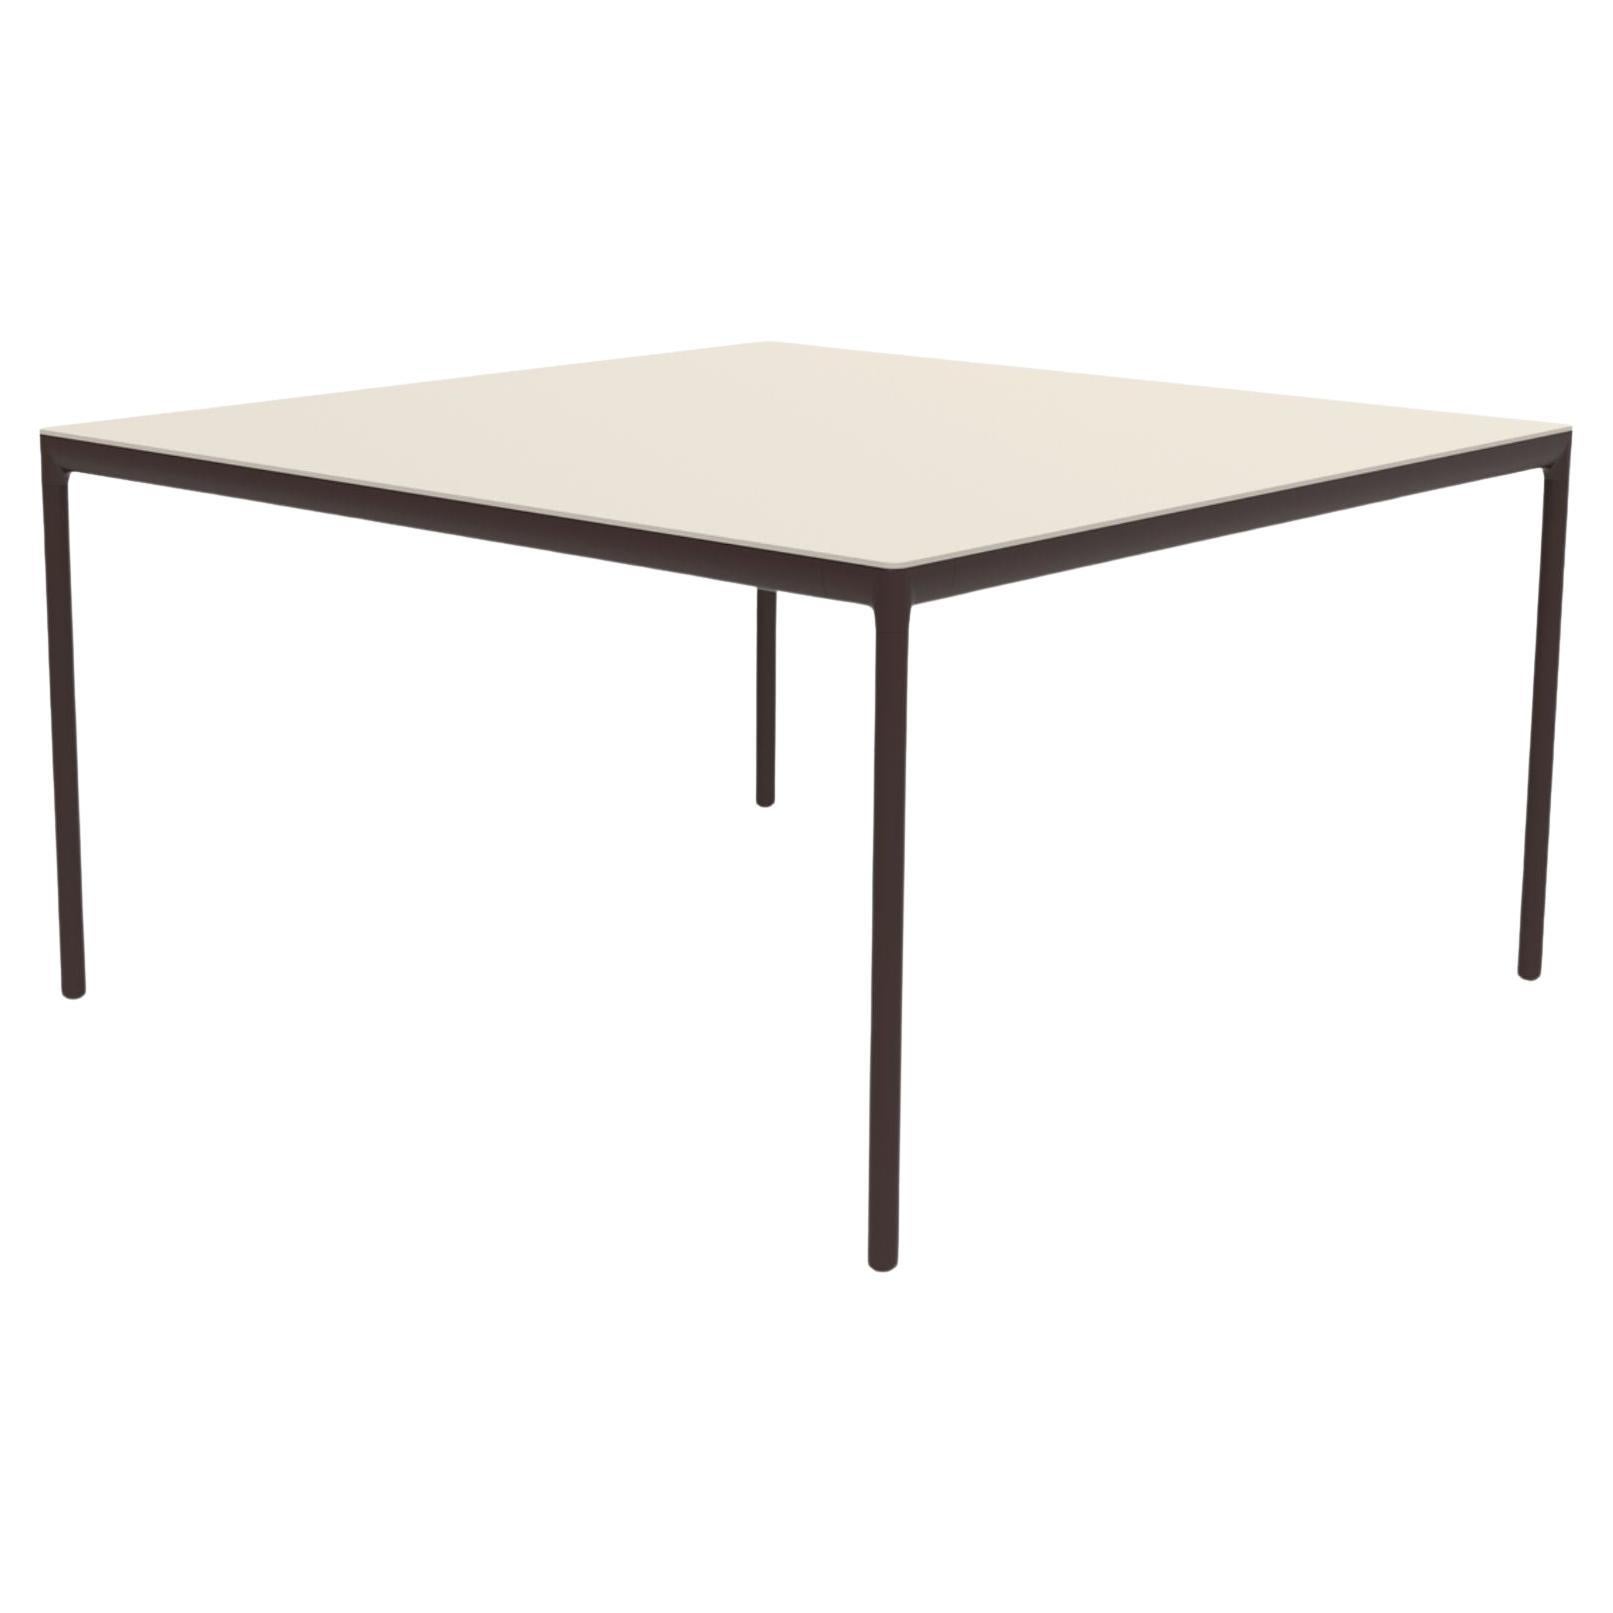 Ribbons Chocolate 138 Coffee Table by Mowee For Sale